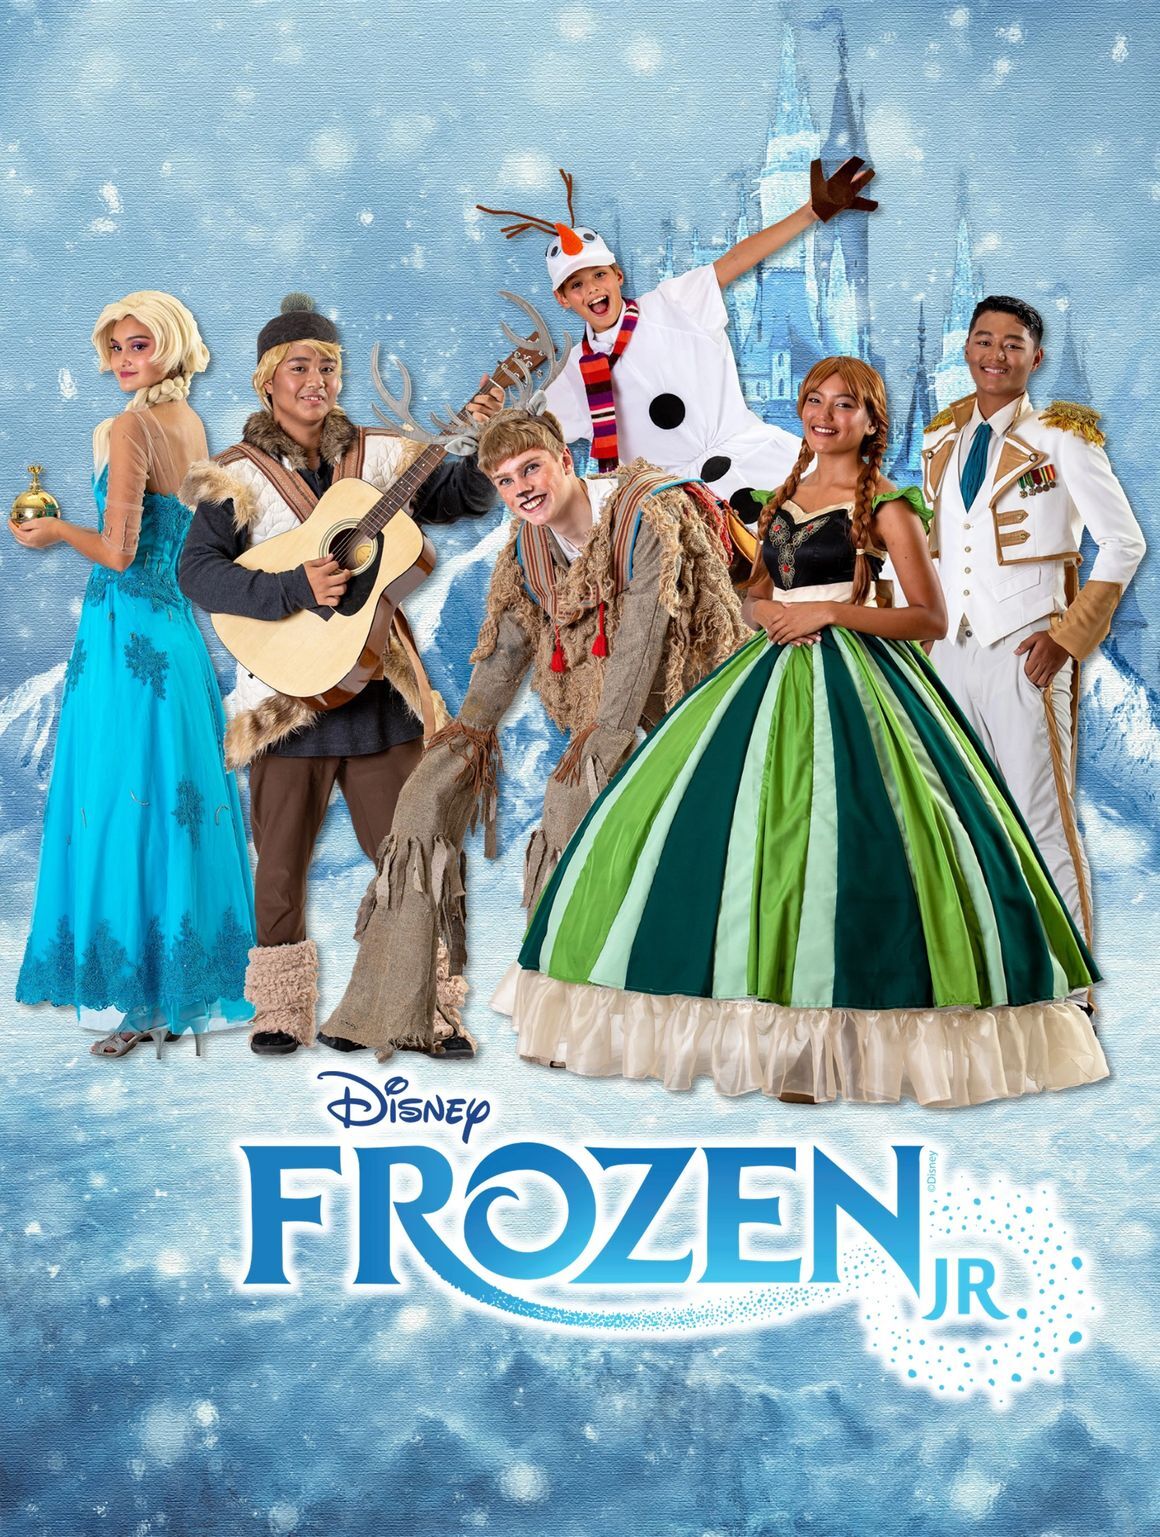 World Theater Productions to release 'Frozen Jr.' on DVD